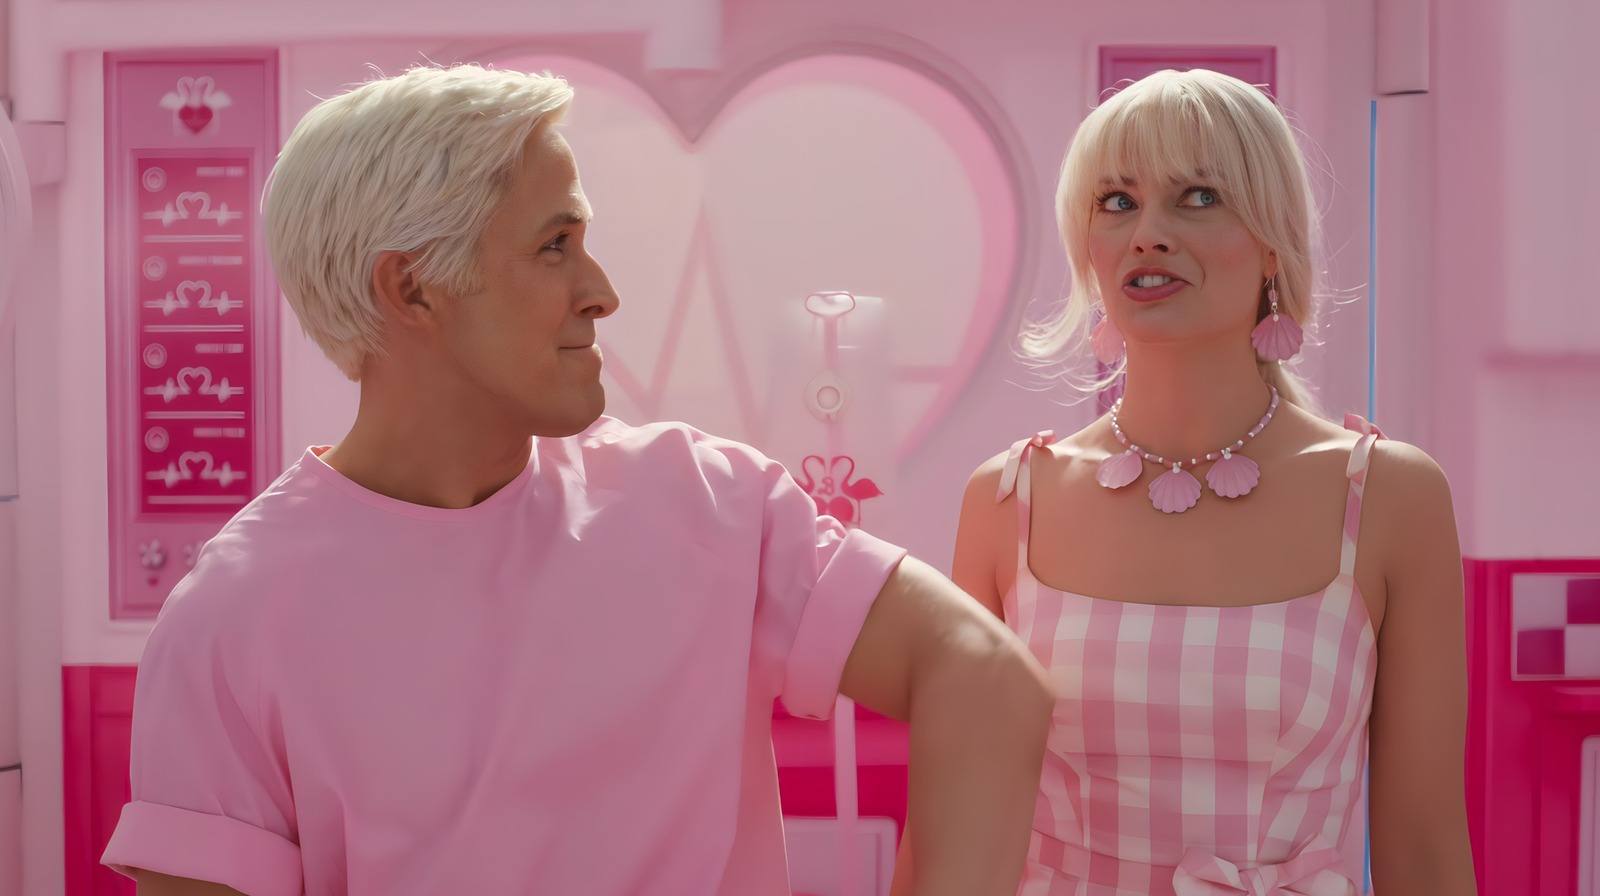 Barbie's Malibu DreamHouse is back on Airbnb – but this time, Ken's hosting